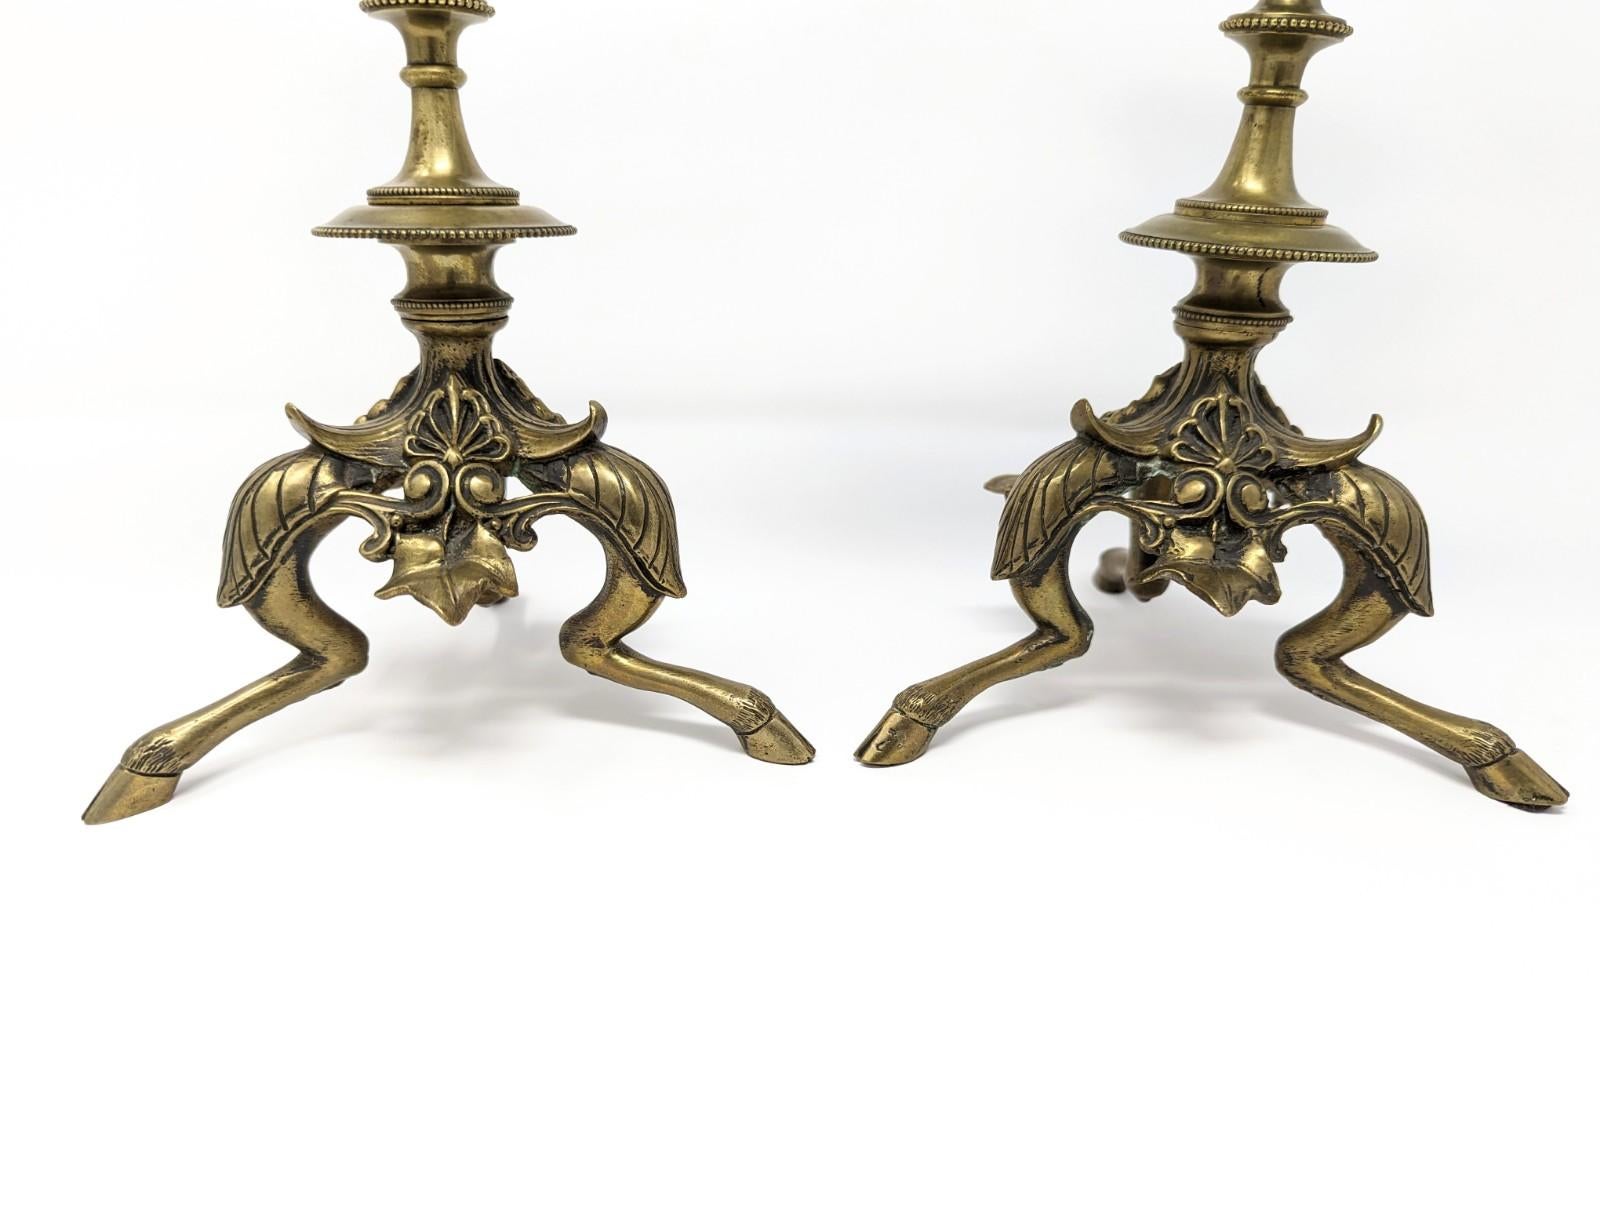 Pair of Antique Candelabras, 19th Century European Brass Candlesticks Footed For Sale 3